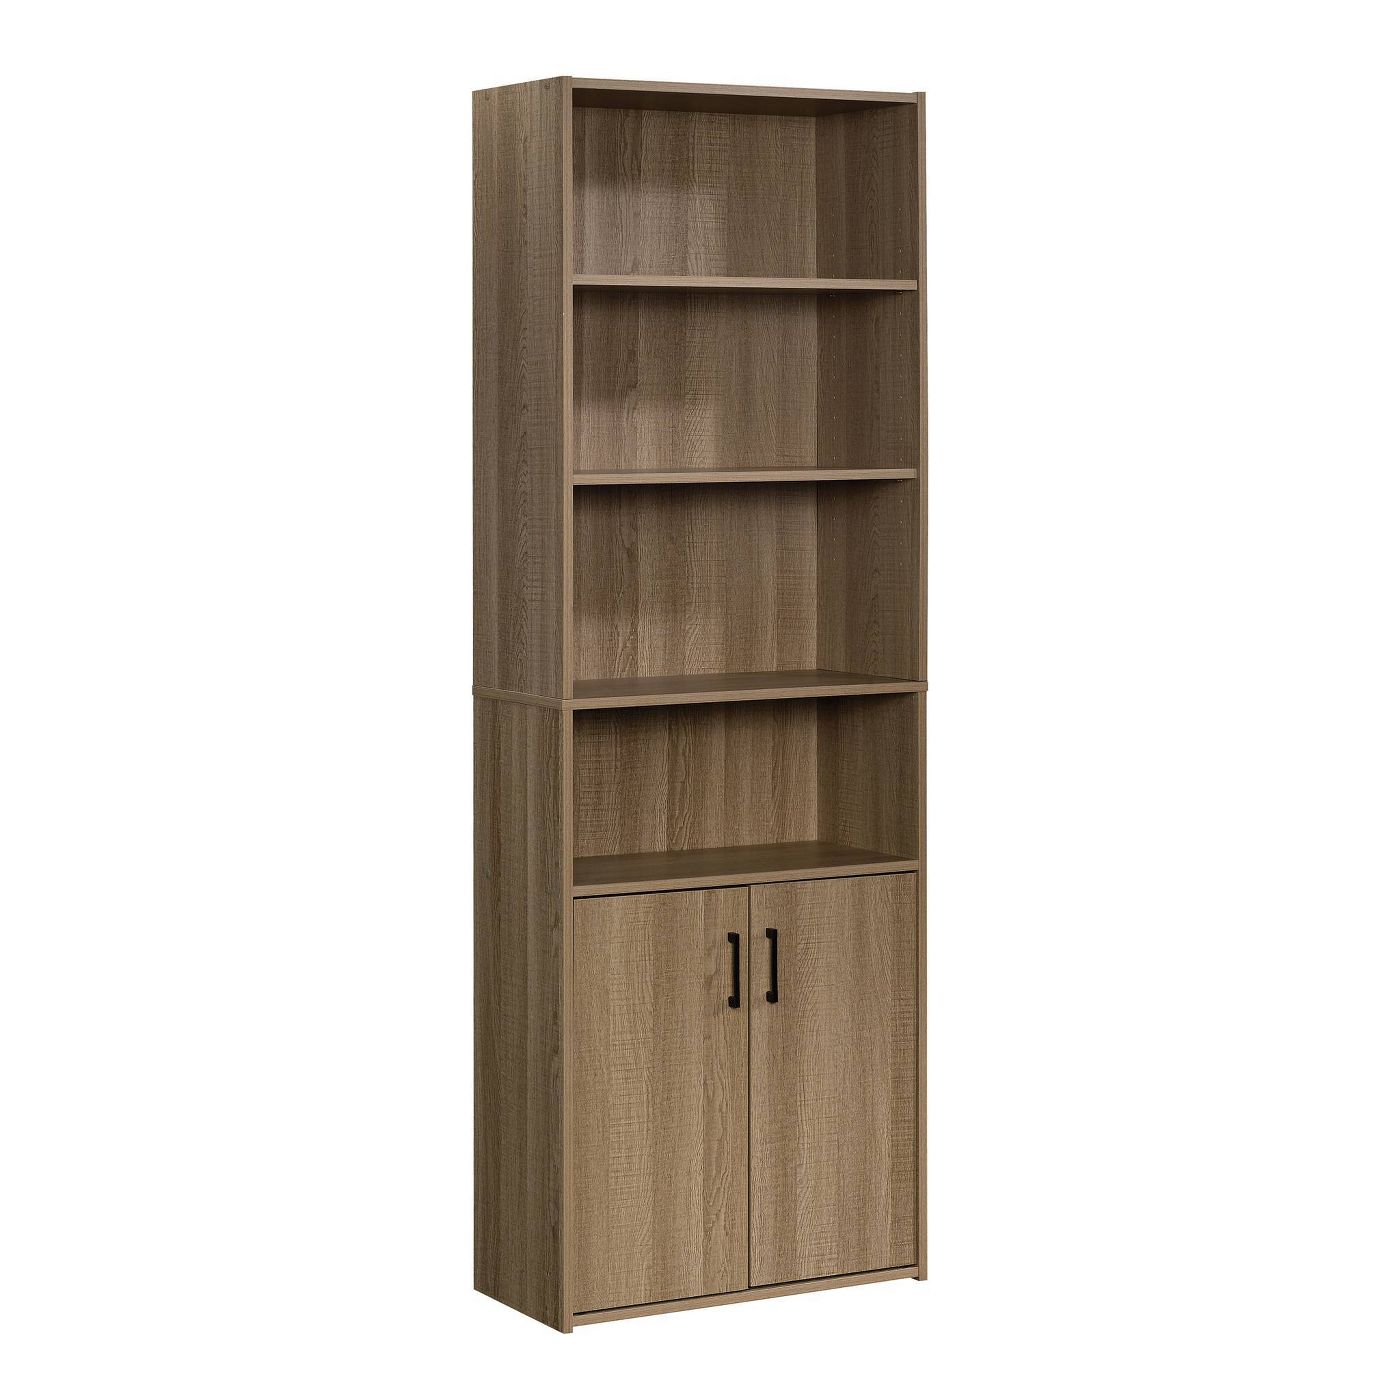 Eco-friendly brown wood bookcase with doors